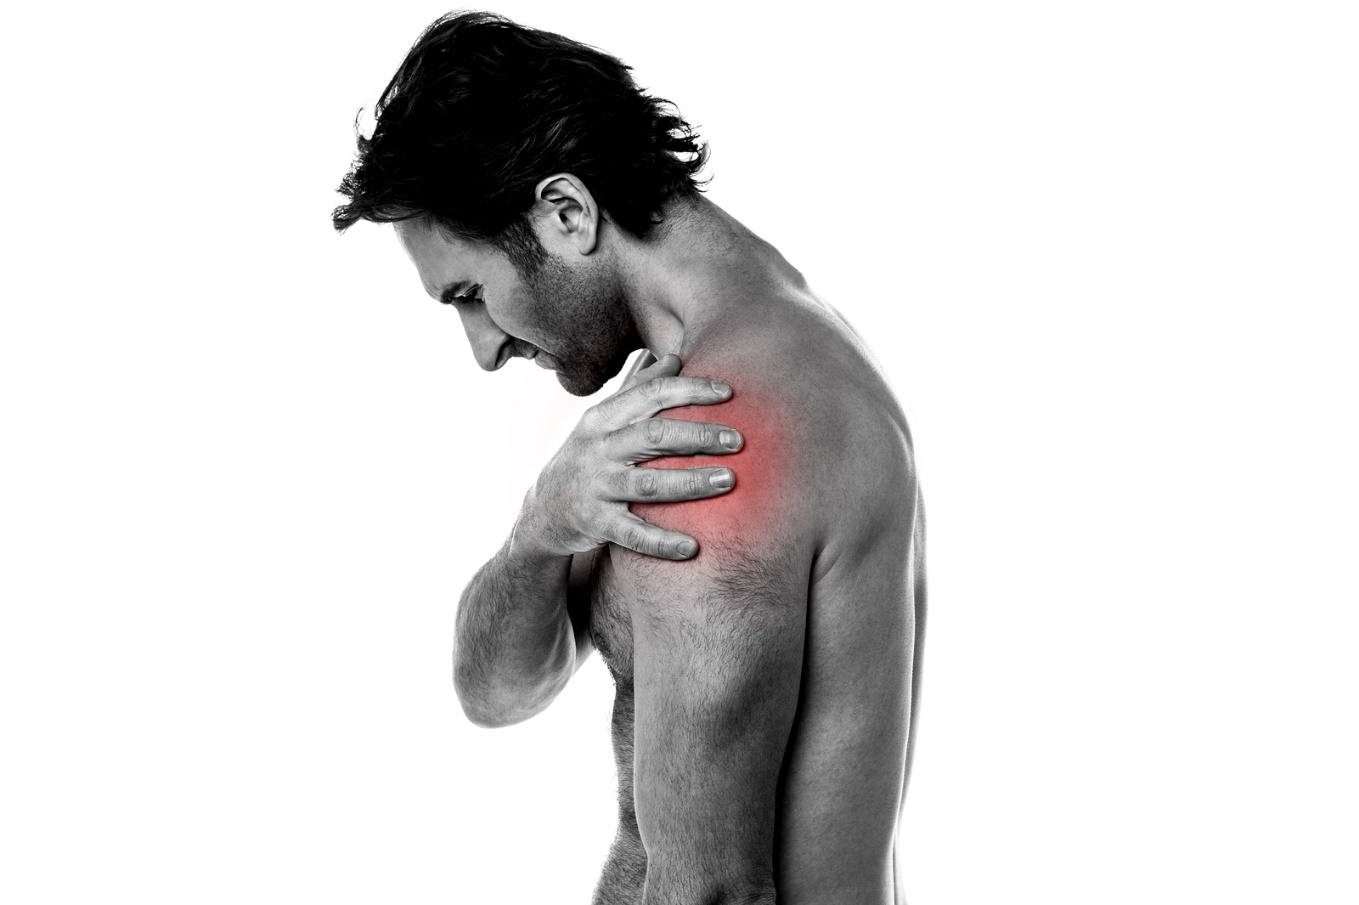 Common Shoulder Injuries From Falling